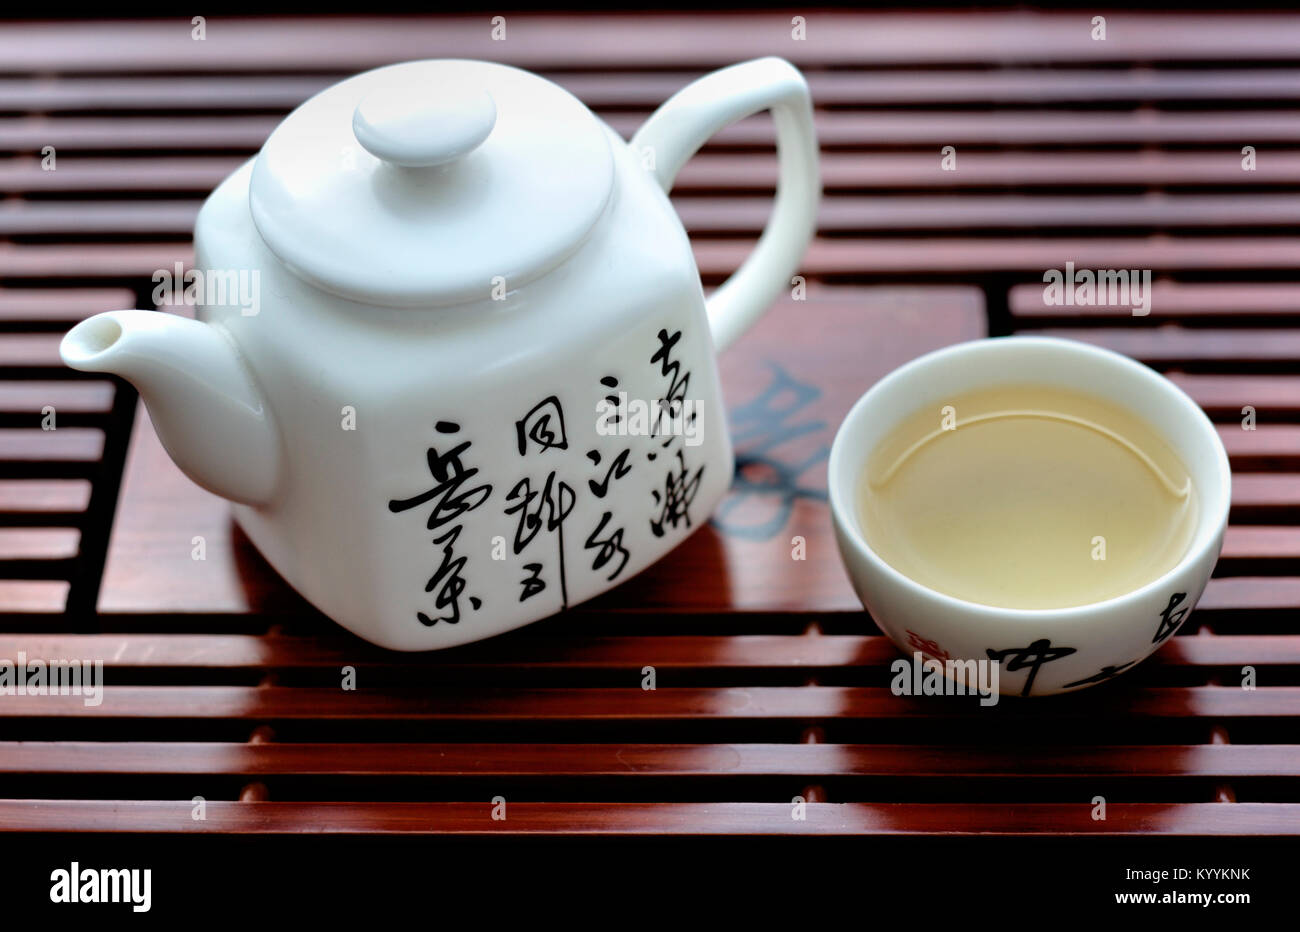 Teapot and cup of tea Stock Photo